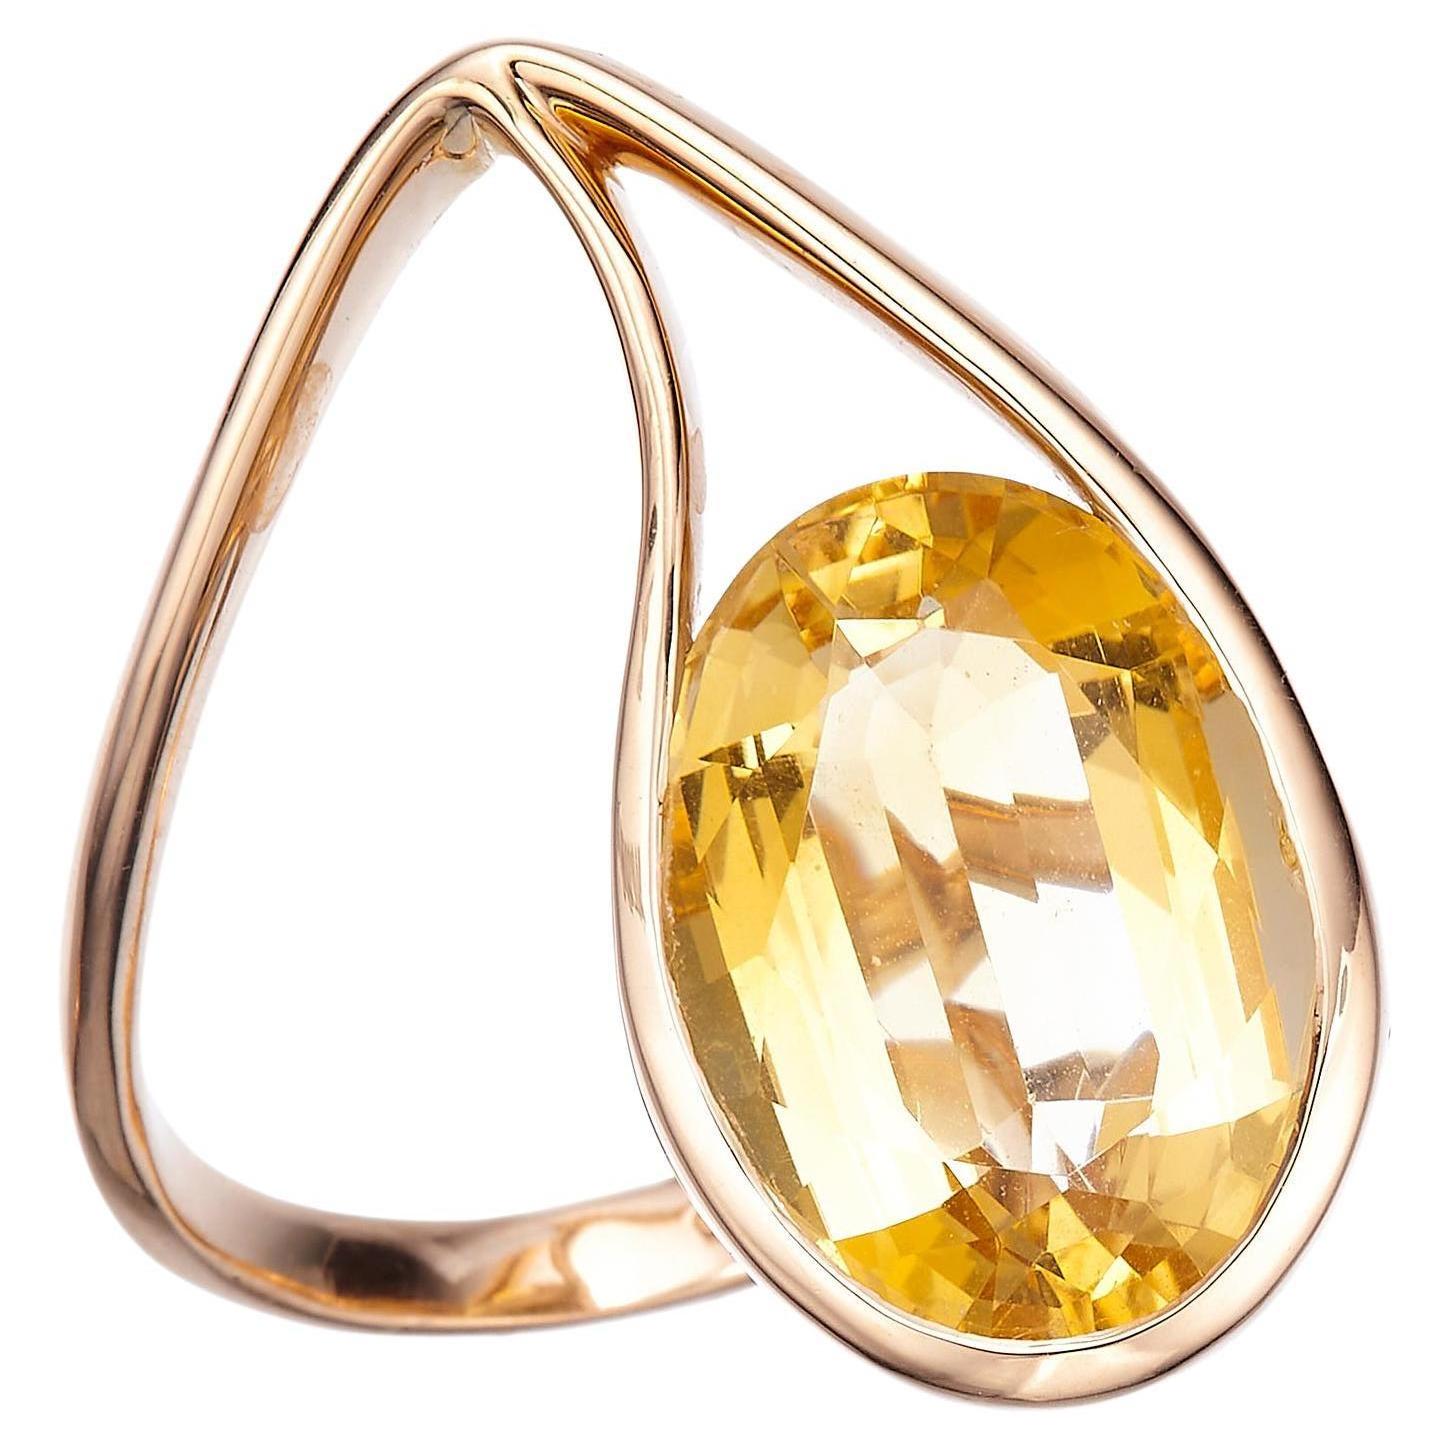 For Sale:  18K Rose Gold Made in Italy Design Innovatively Worn Citrine Cocktail Ring